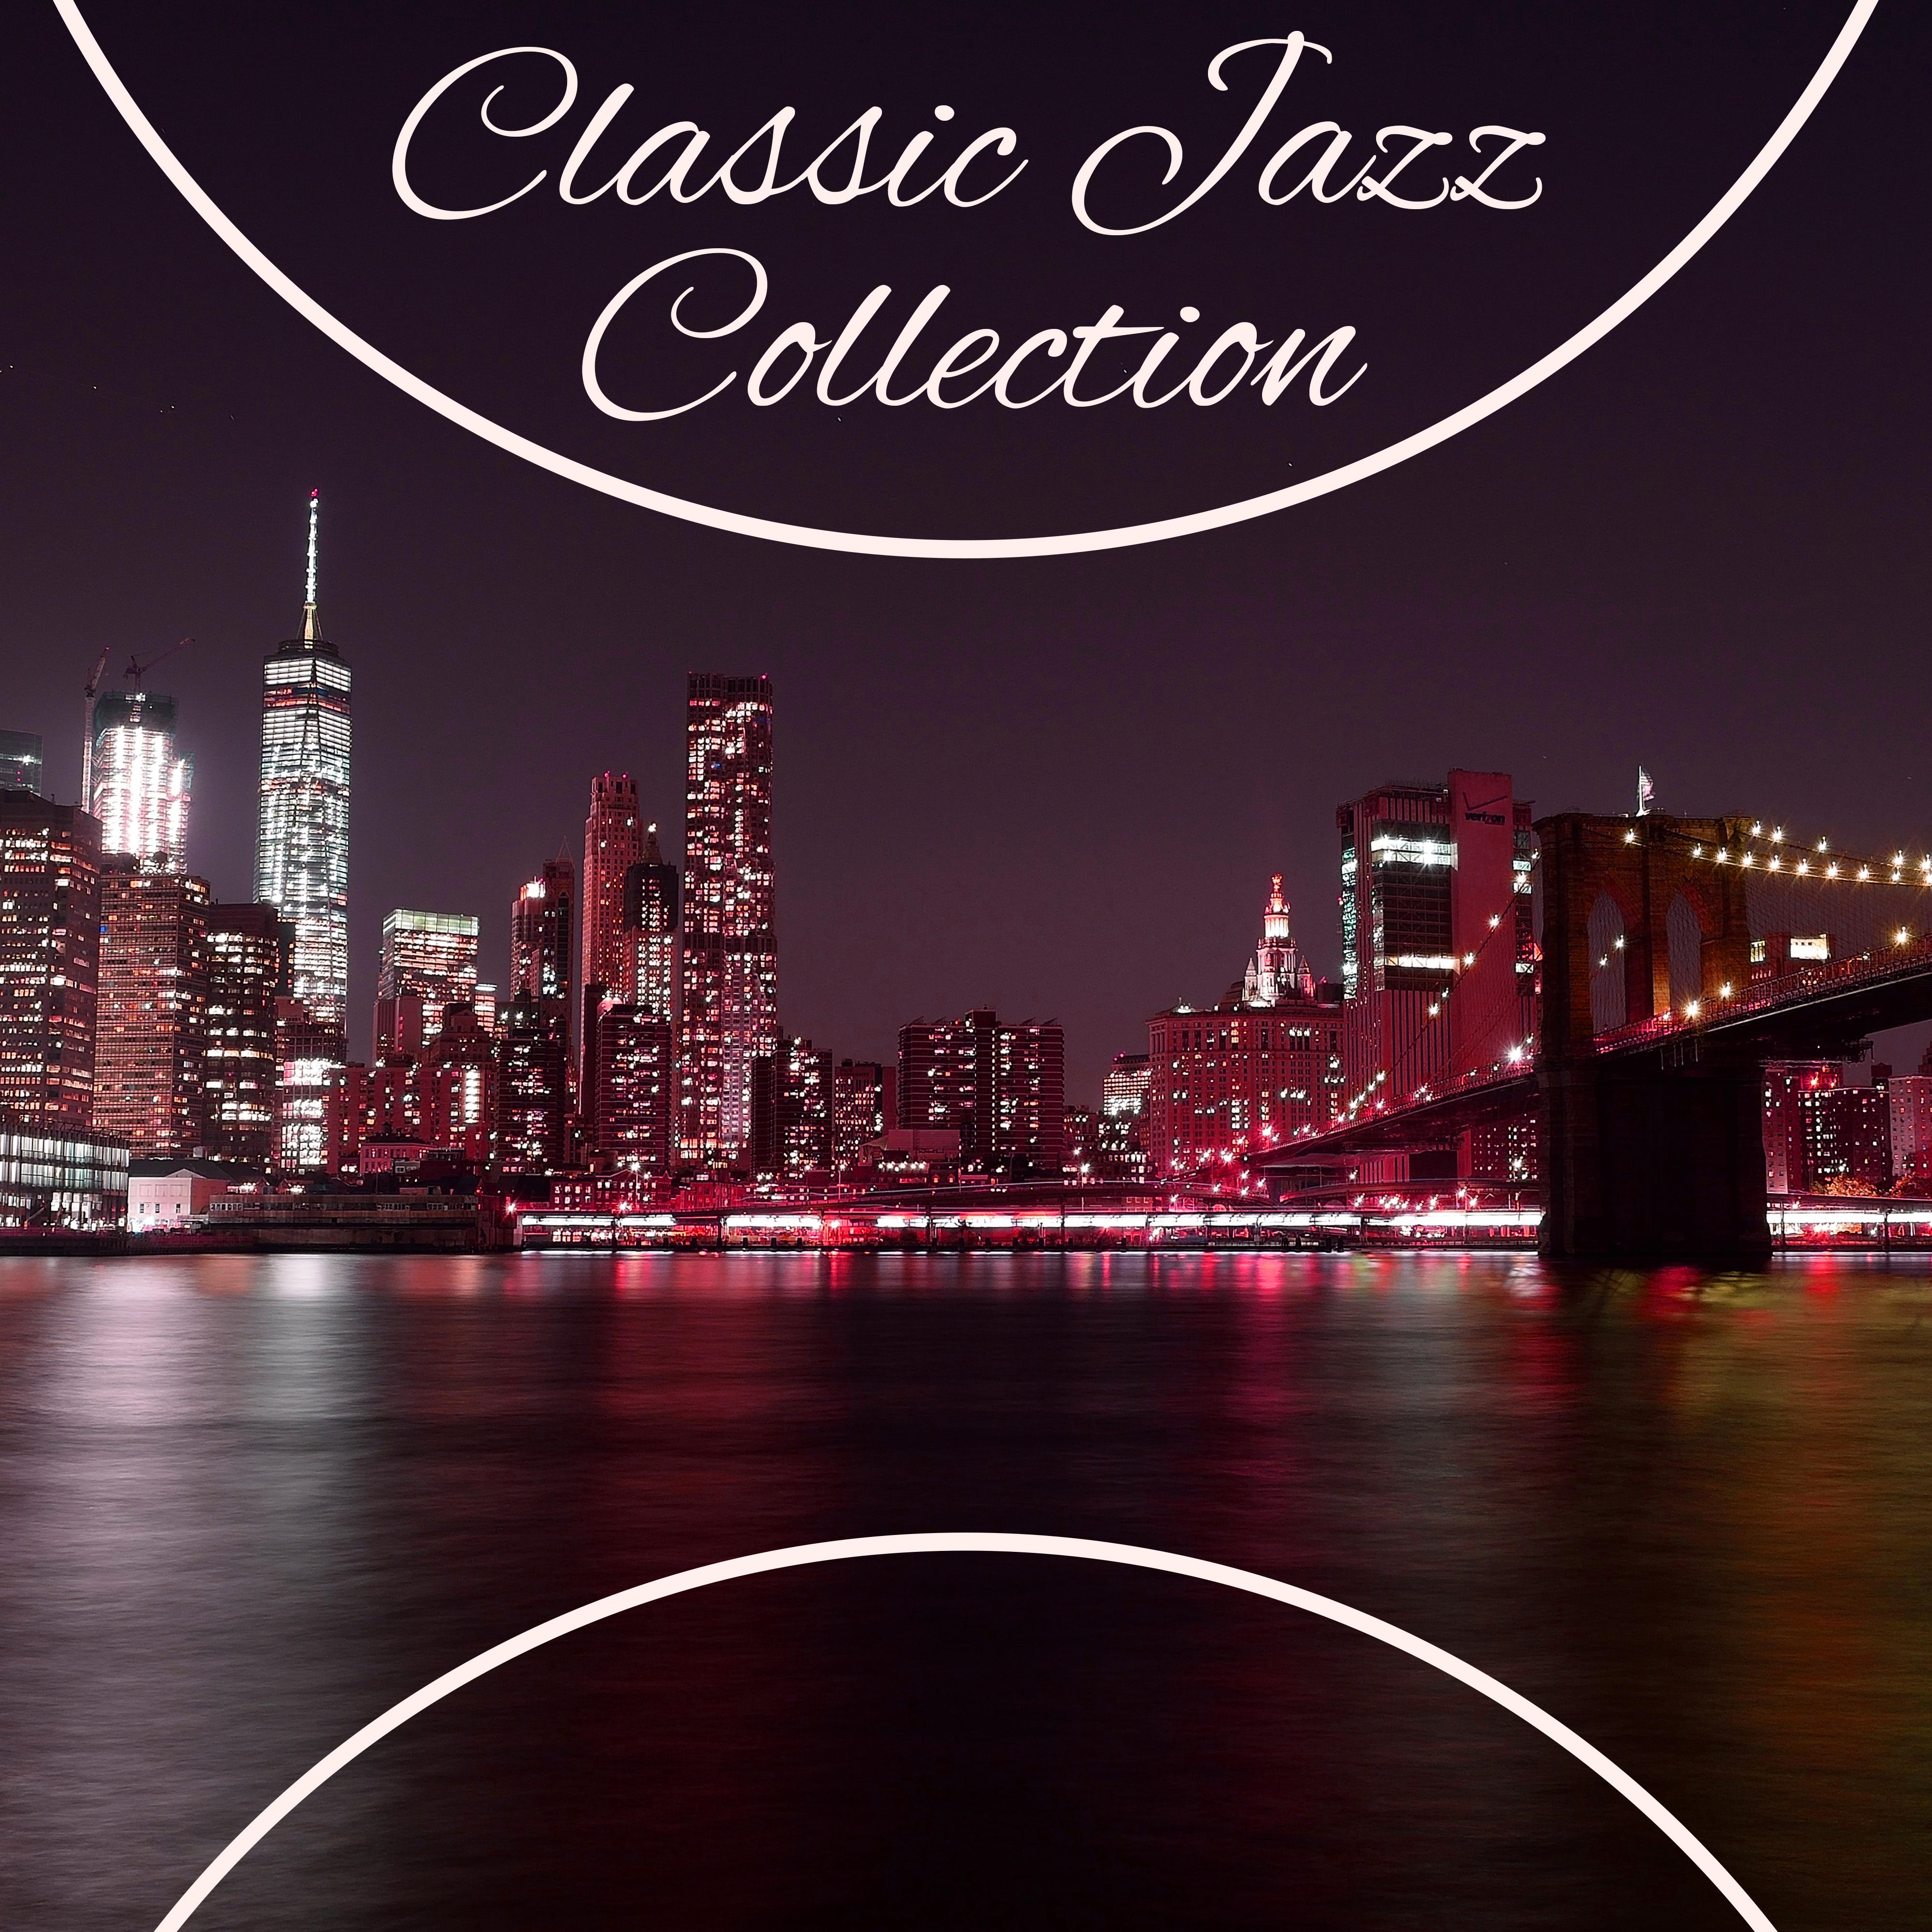 Classic Jazz Collection – Mellow Jazz Sounds, Instrumental Piano, Easy Listening, Relax with Jazz Music